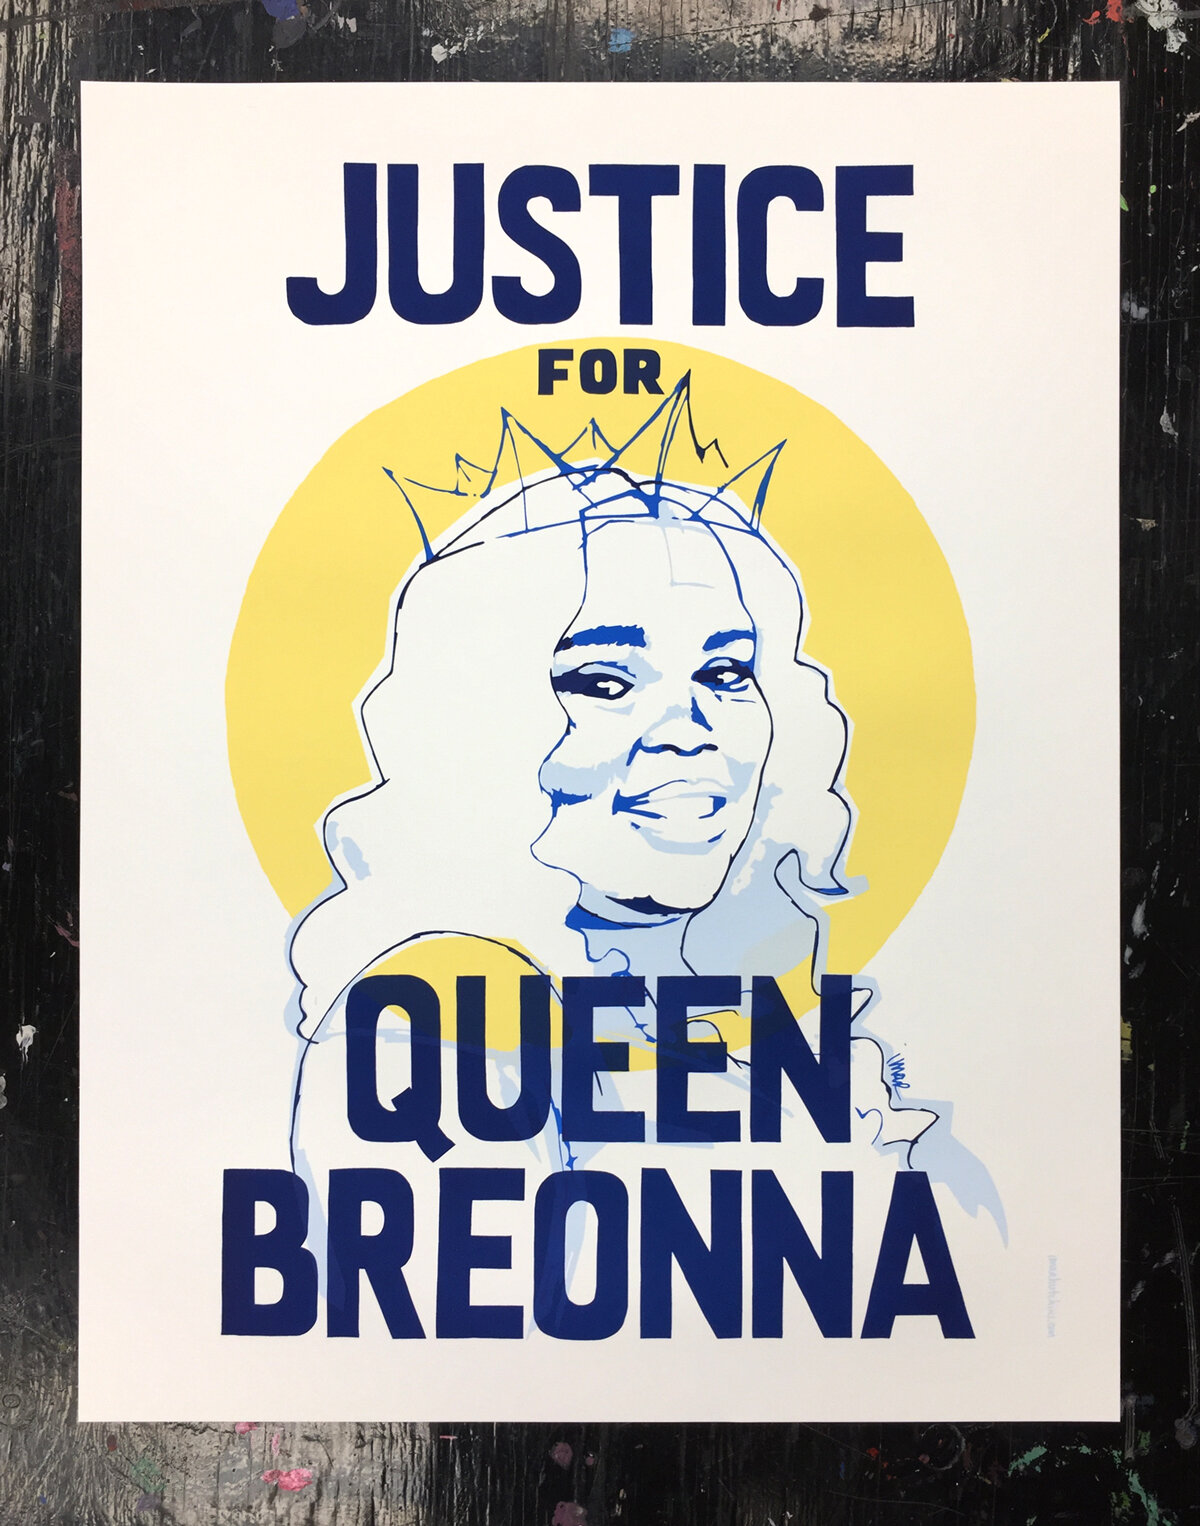 Justice for Queen Breonna